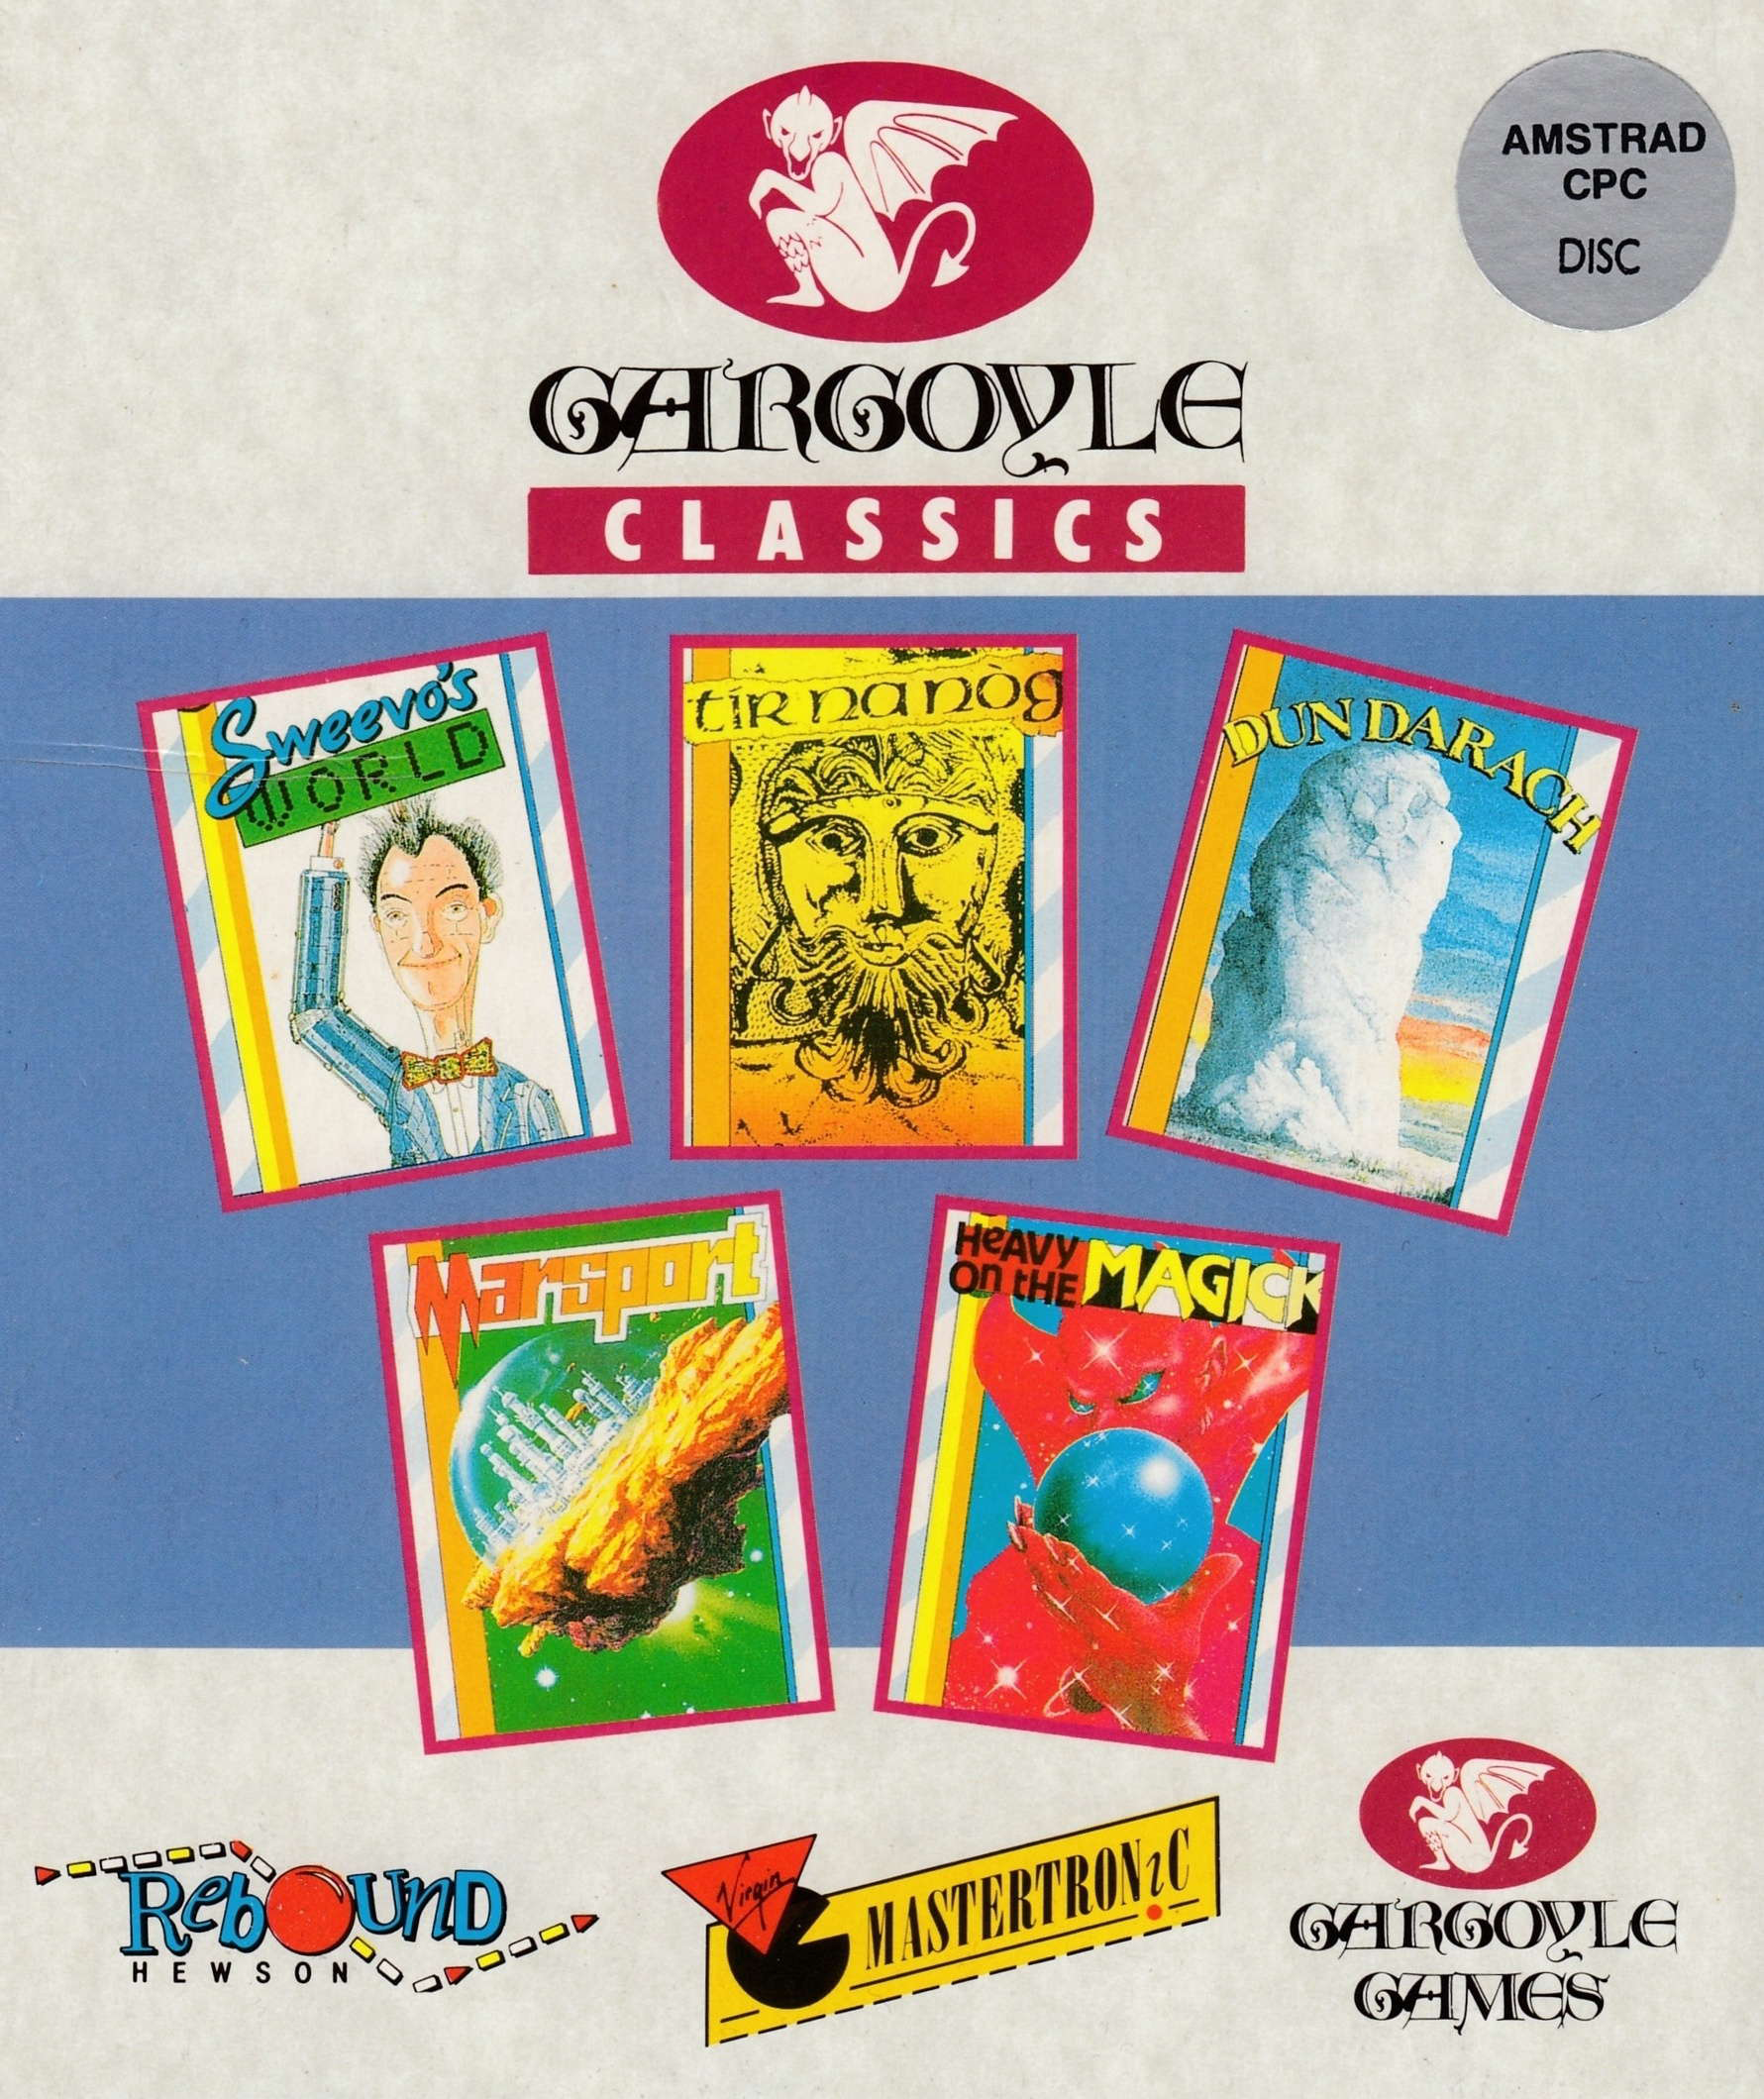 cover of the Amstrad CPC game Gargoyle Classics  by GameBase CPC